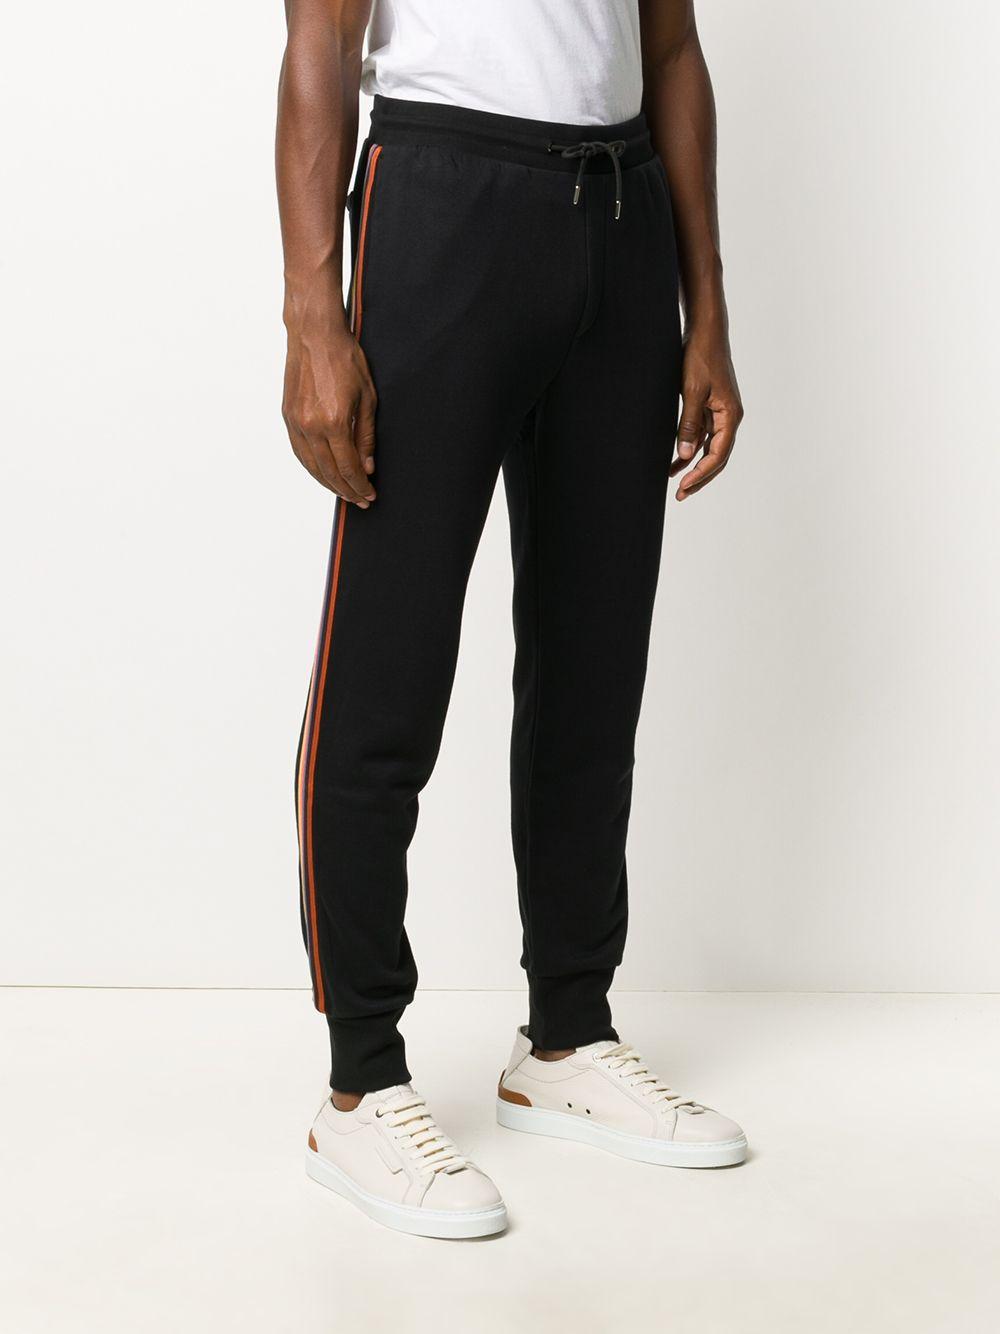 Paul Smith Cotton Taped Seam Sweatpants in Black for Men - Lyst